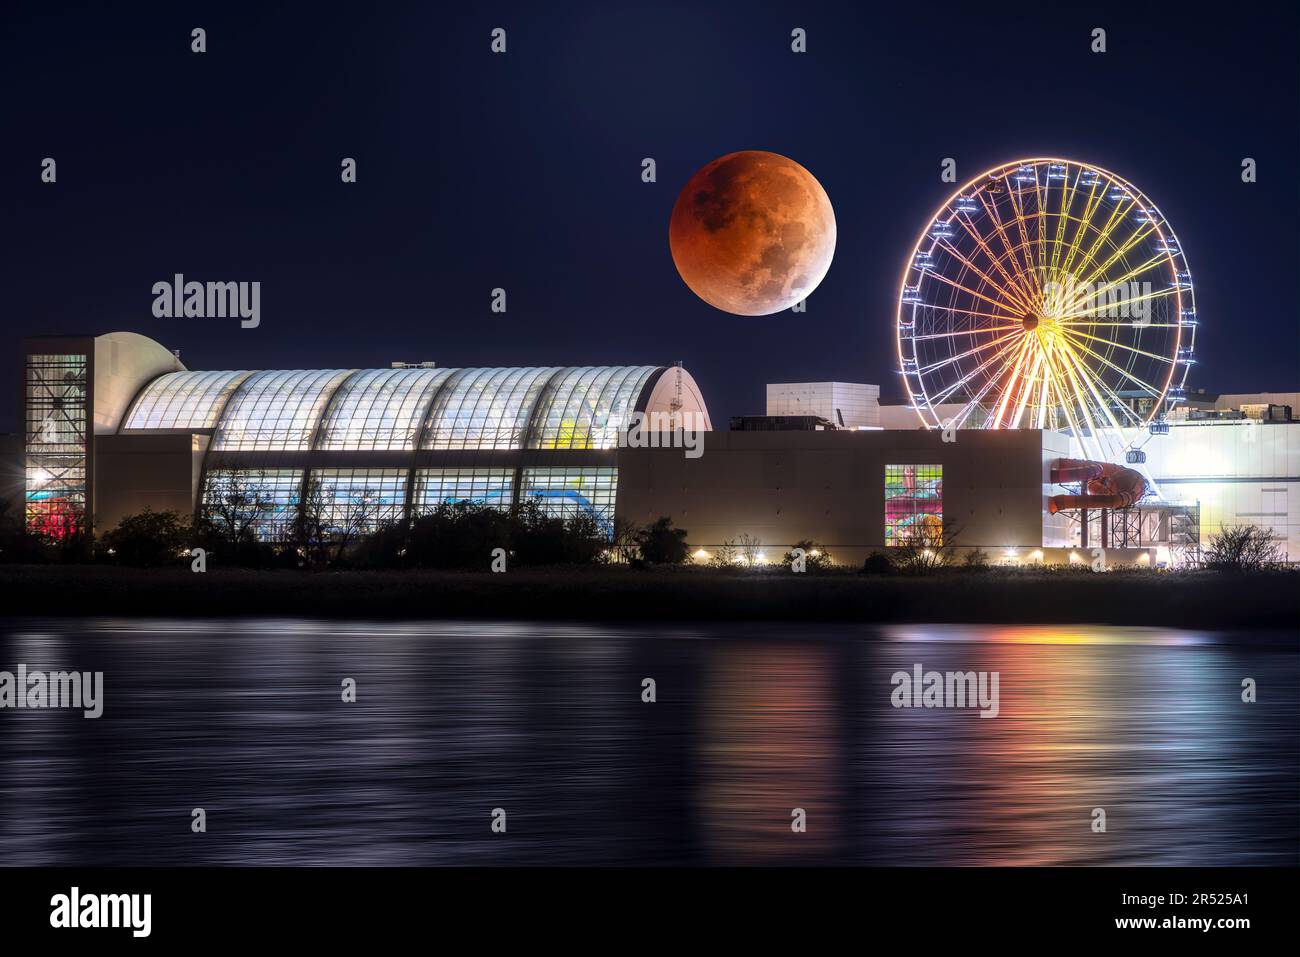 Lunar Eclipse - The Beaver full blood moon lunar eclipse.  Also seen is the illuminated Dream Wheel ferris wheel at American Dream mall in Rutherford, Stock Photo